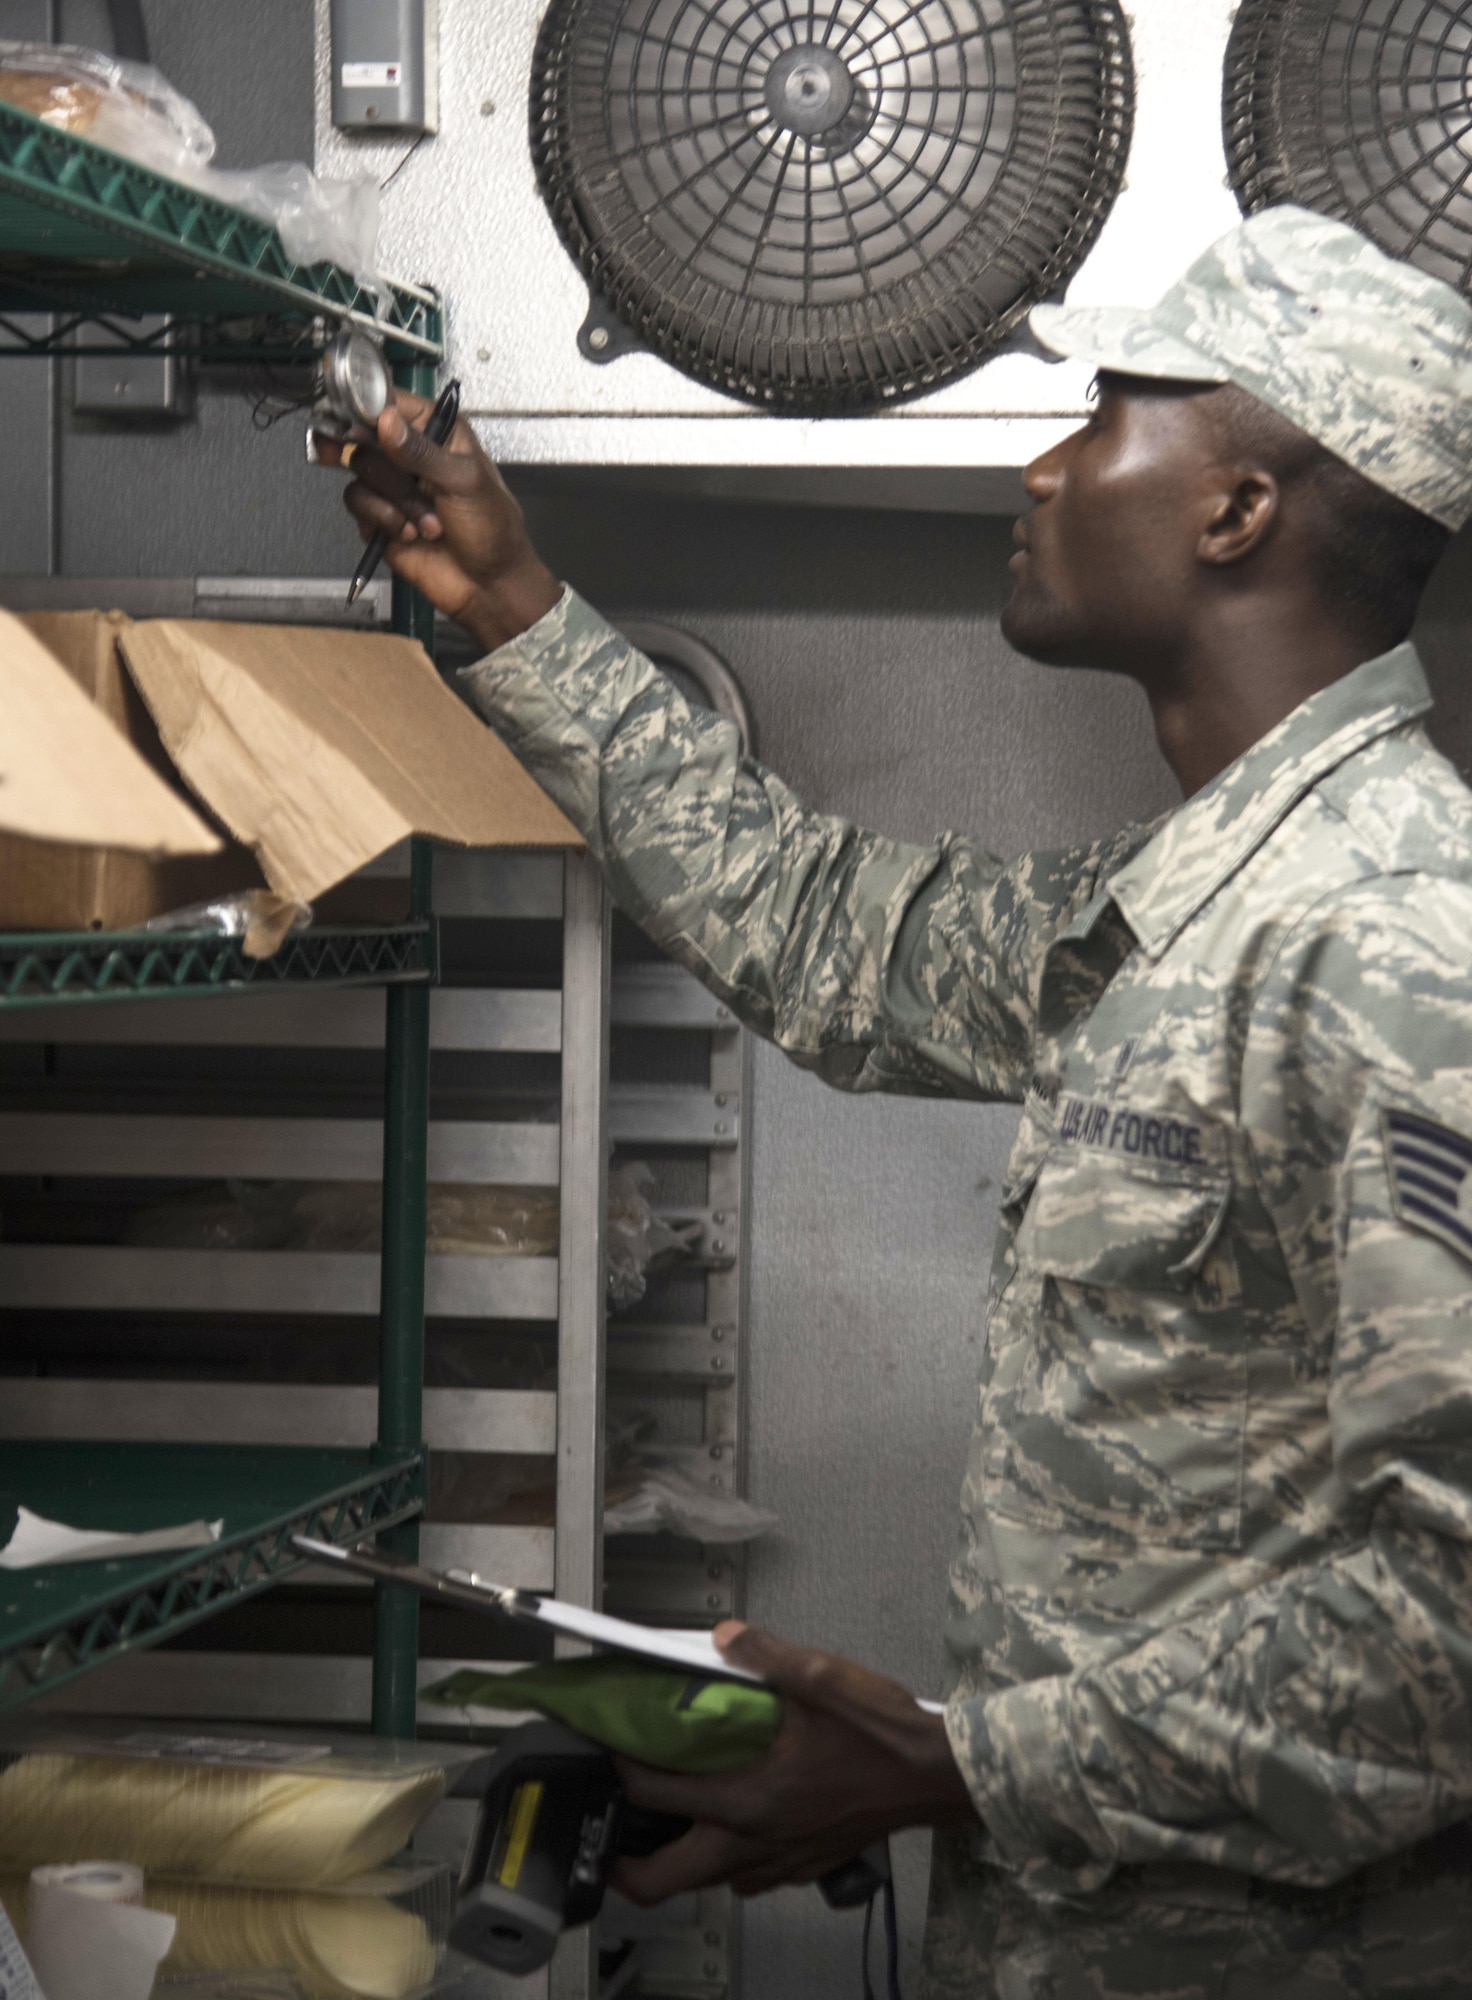 U.S. Air Force Staff Sgt. Cornelius Bransah, the NCO in charge of food safety and sanitation assigned to the 6th Aerospace Medical Squadron, checks a thermometer inside a walk-in refrigerator at MacDill Air Force Base, Fla., June 13, 2017. Bransah routinely inspects more than 50 facilities on MacDill, ensuring the food and the facilities are safe for the public. (U.S. Air Force photo by Airman 1st Class Adam R. Shanks)